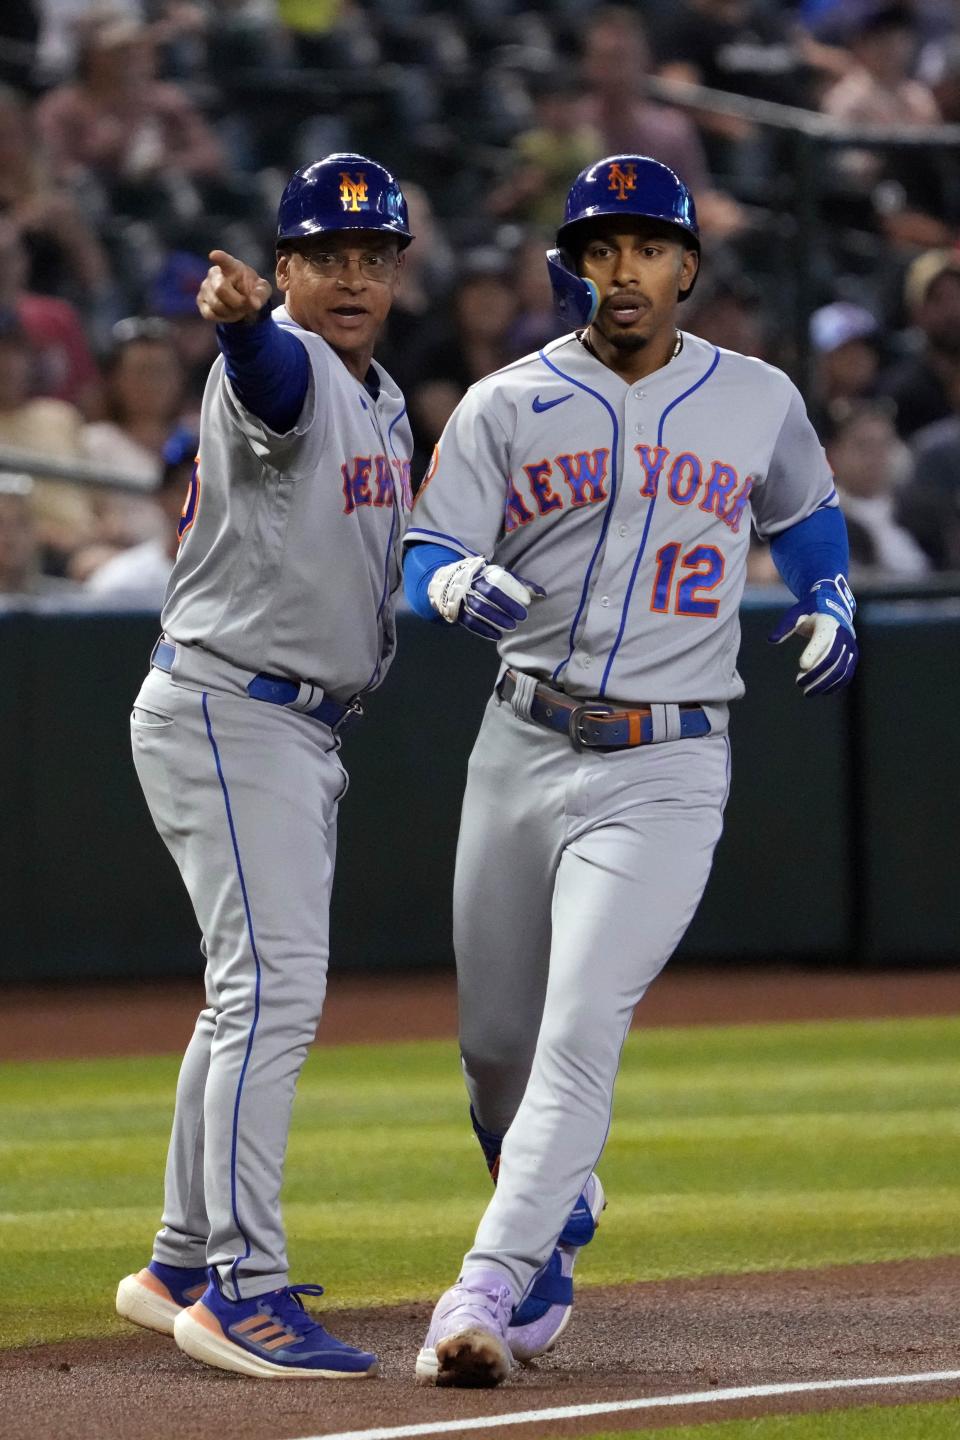 New York Mets shortstop Francisco Lindor (12) gets instructions from New York Mets infield & third base coach Joey Cora (56) after hitting a triple against the Arizona Diamondbacks during the first inning at Chase Field in Phoenix on July 6, 2023.